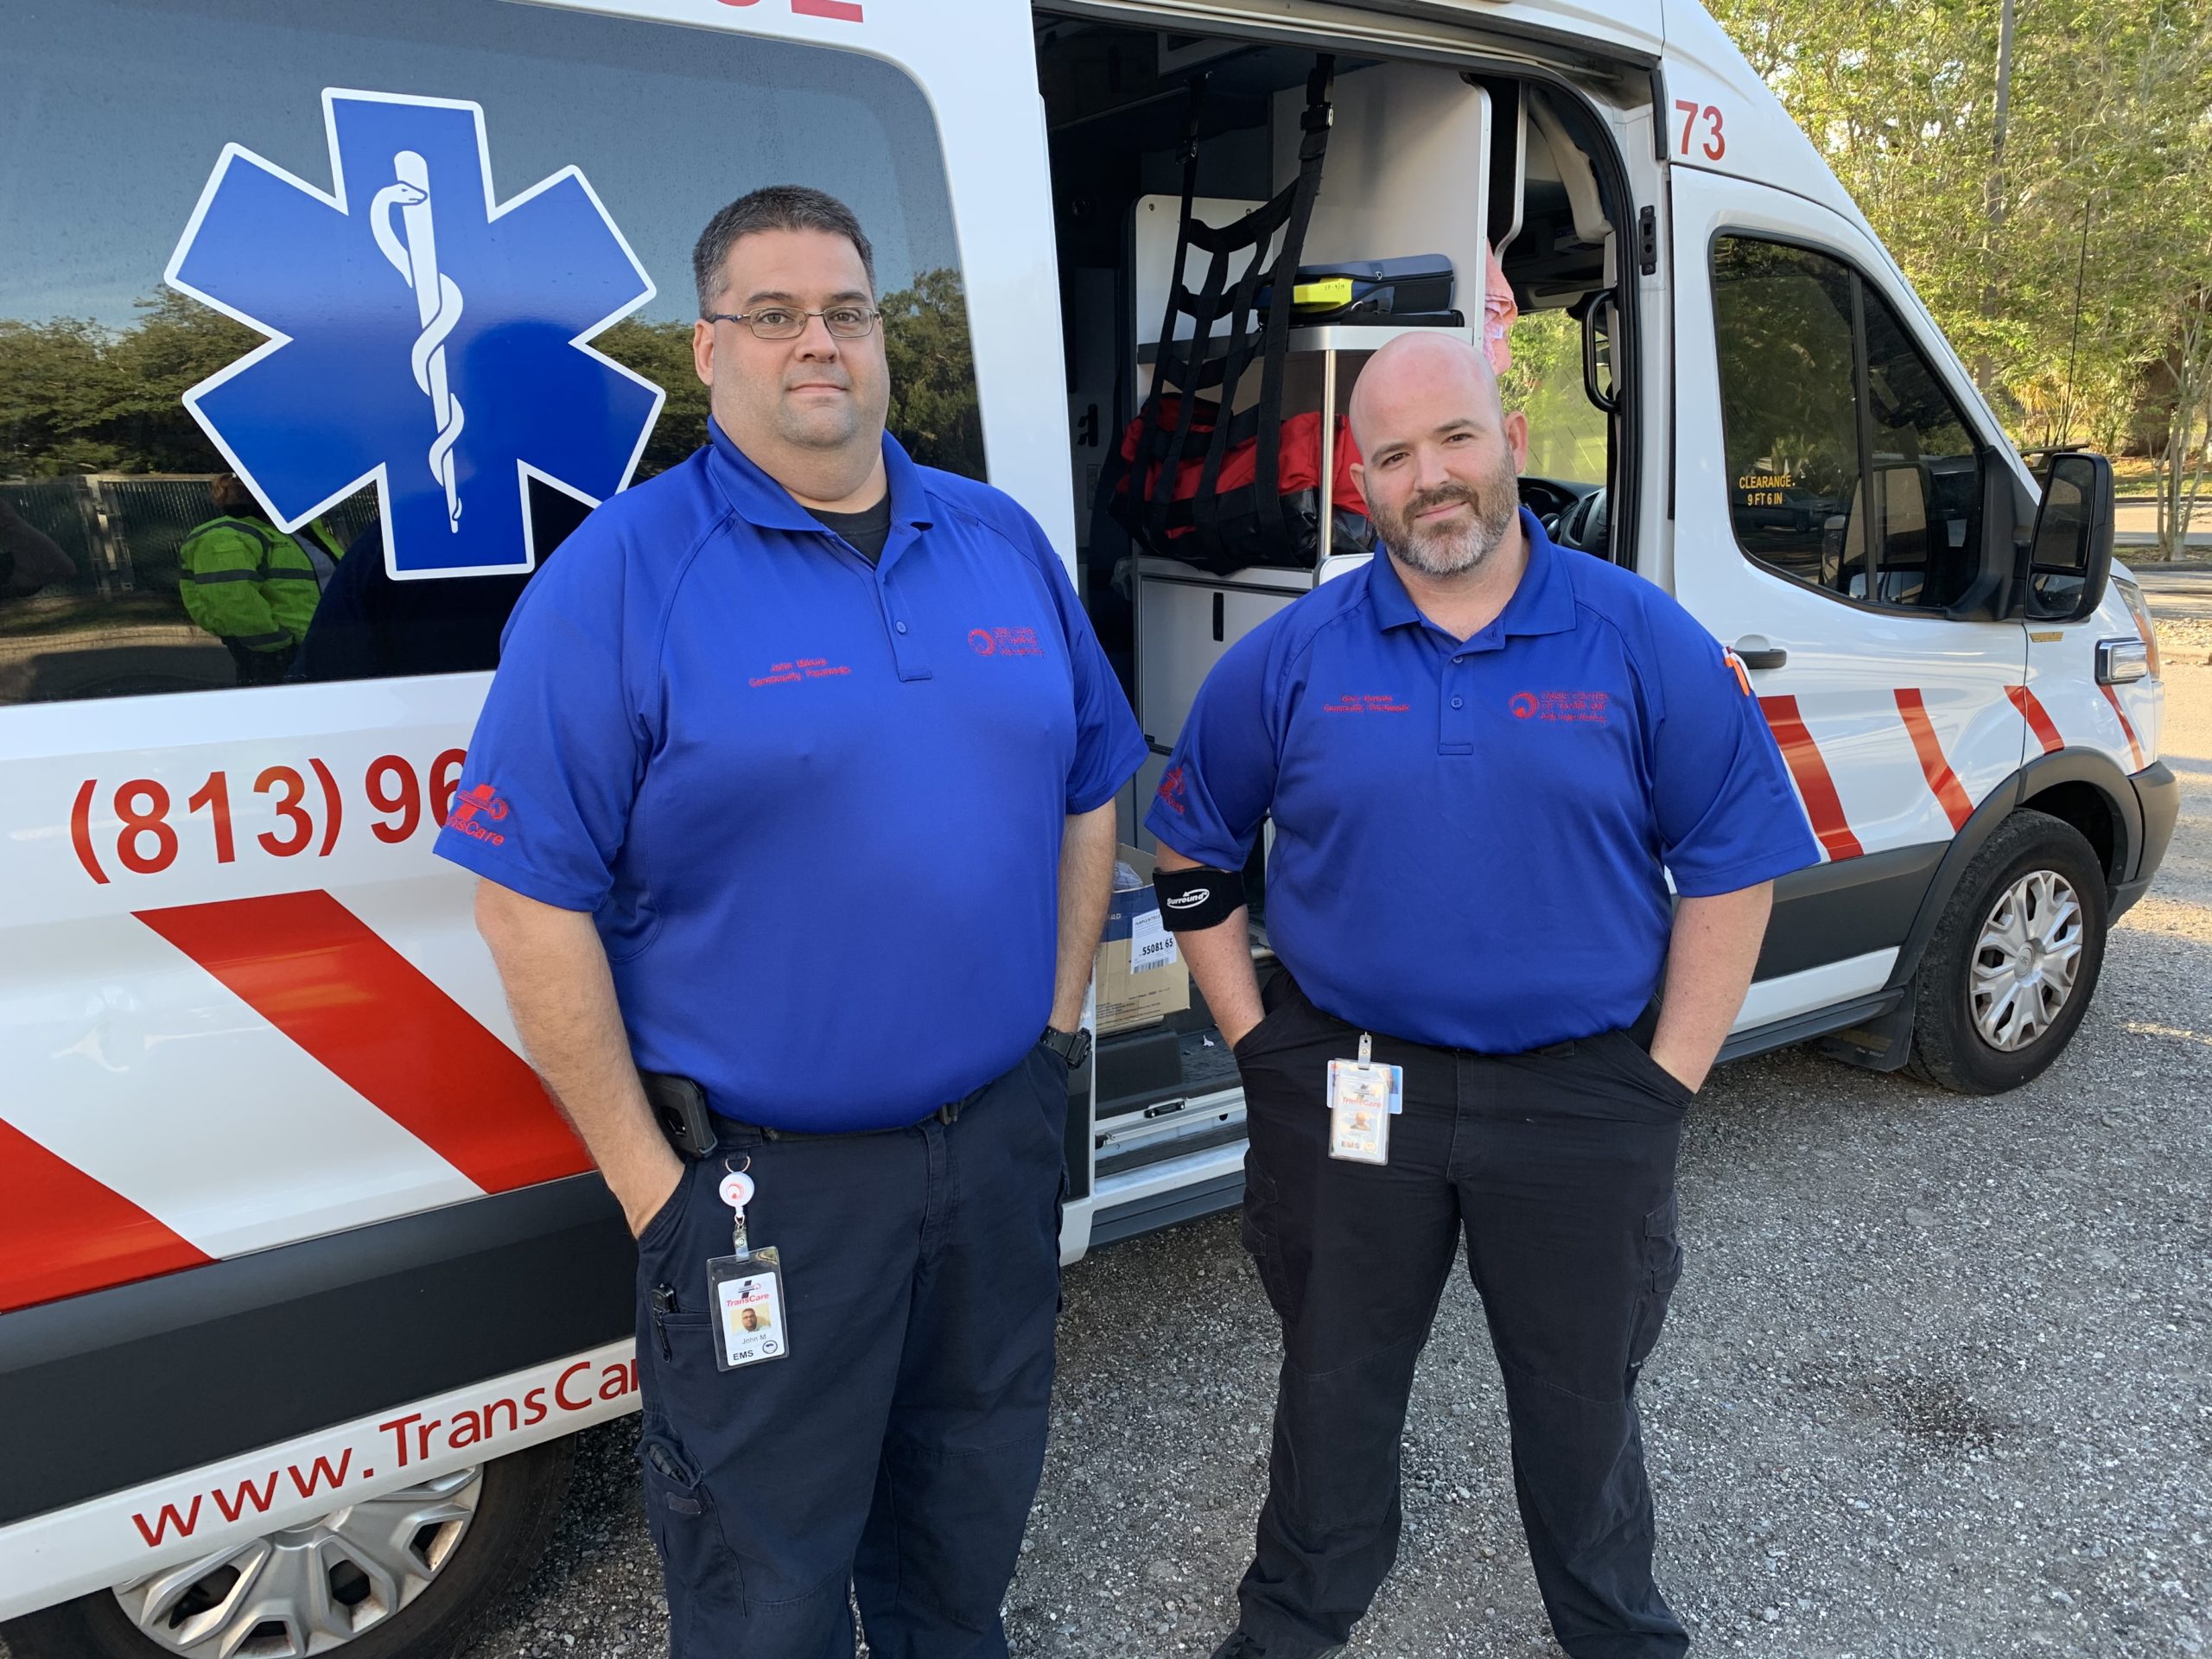 Expanding Community Paramedicine Throughout Tampa